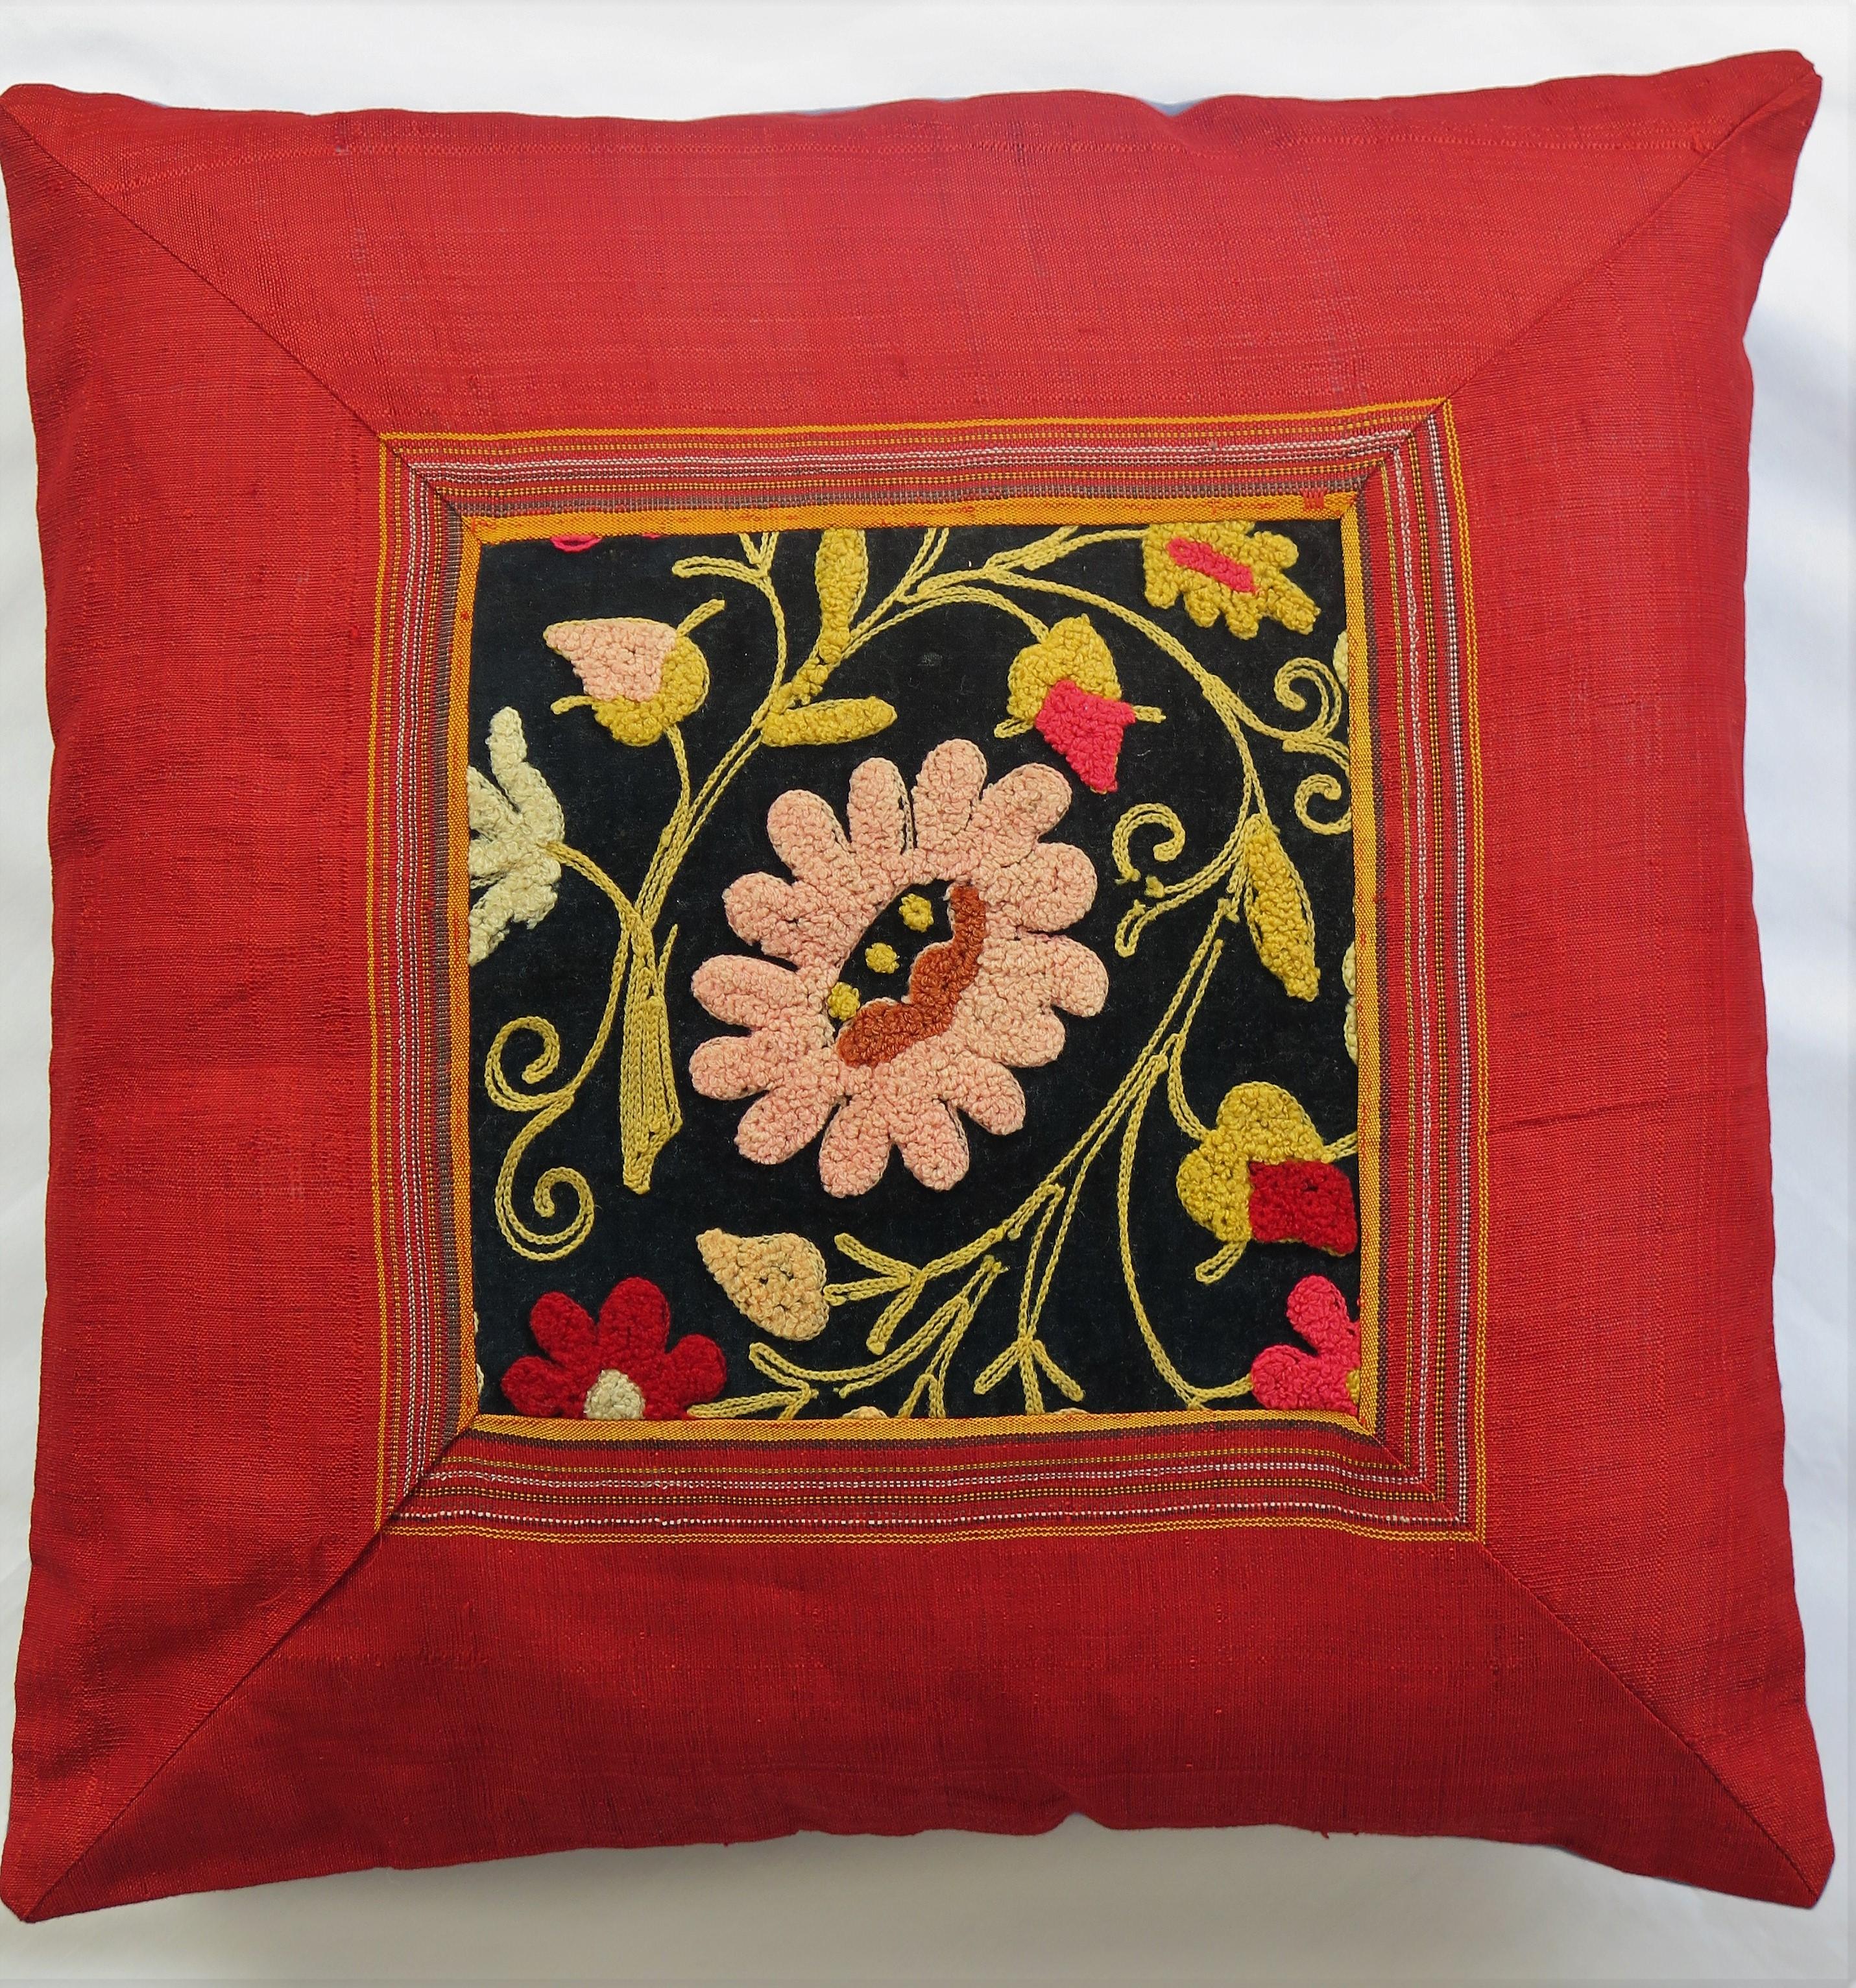 Art Nouveau Cushion or Pillow hand Embroidered, Circa 1900 In Good Condition For Sale In Lincoln, Lincolnshire